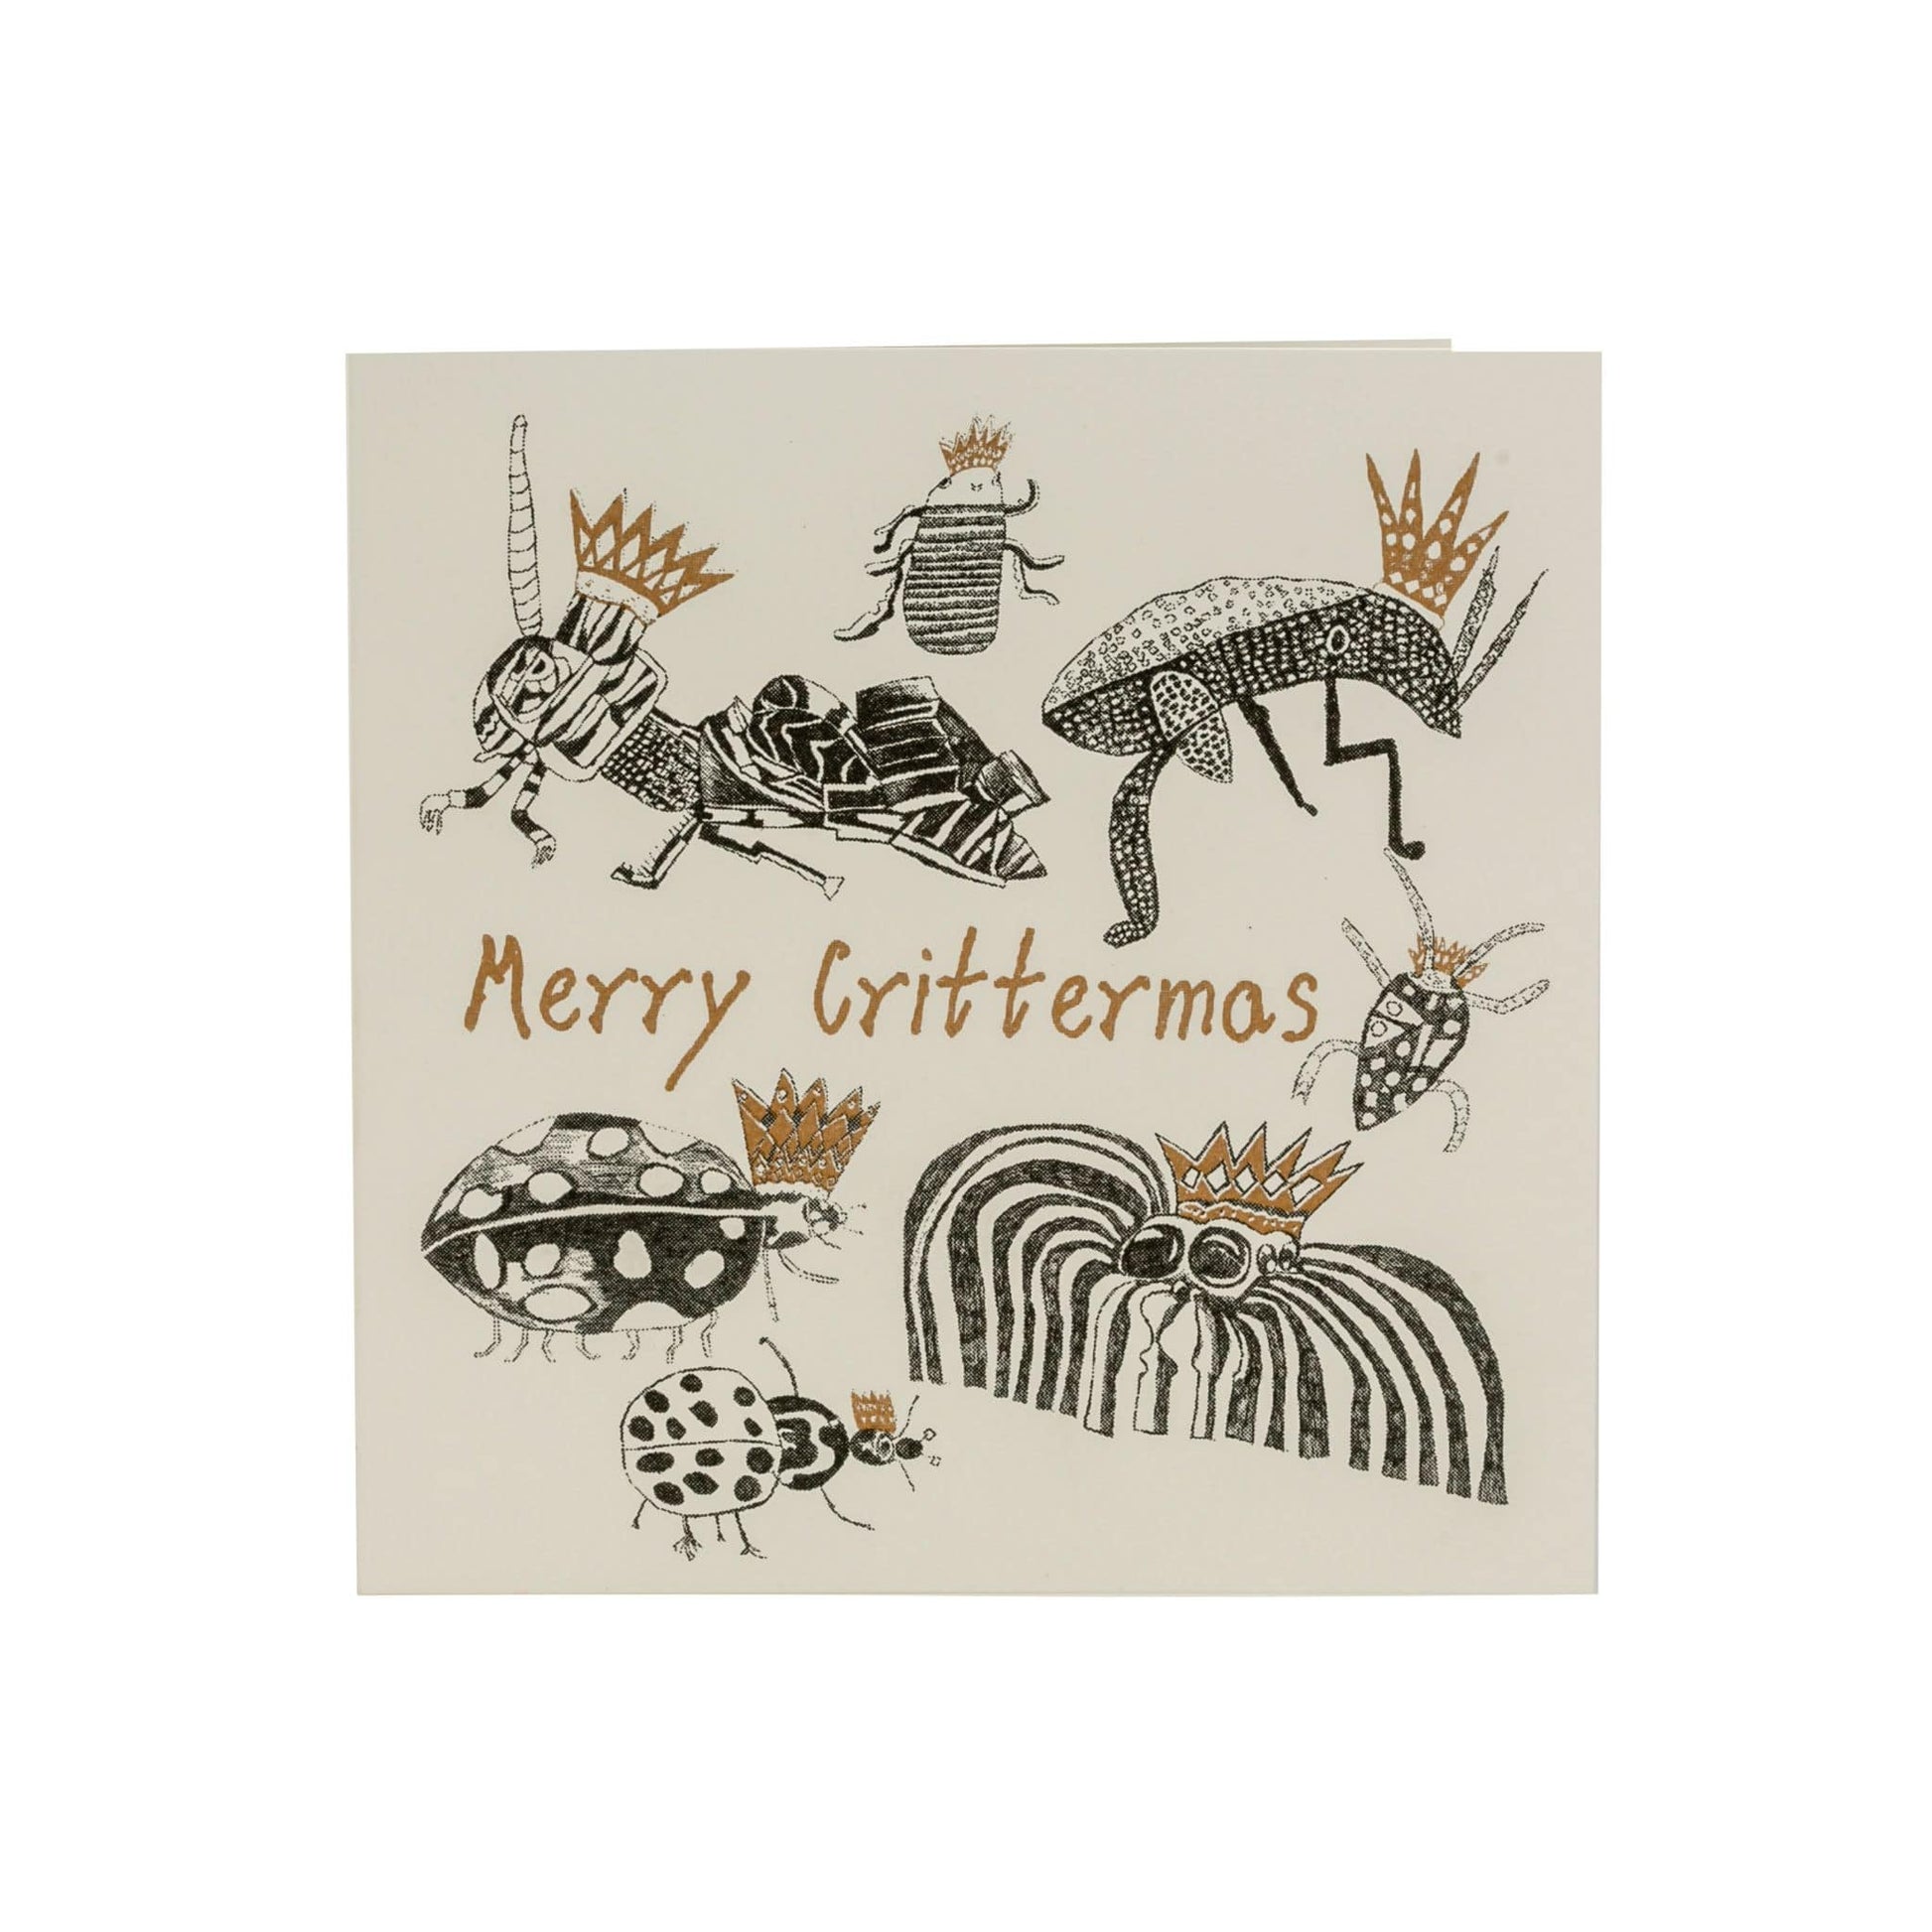 Merry Crittermas recycled  Christmas card from ARTHOUSE Unlimited-min